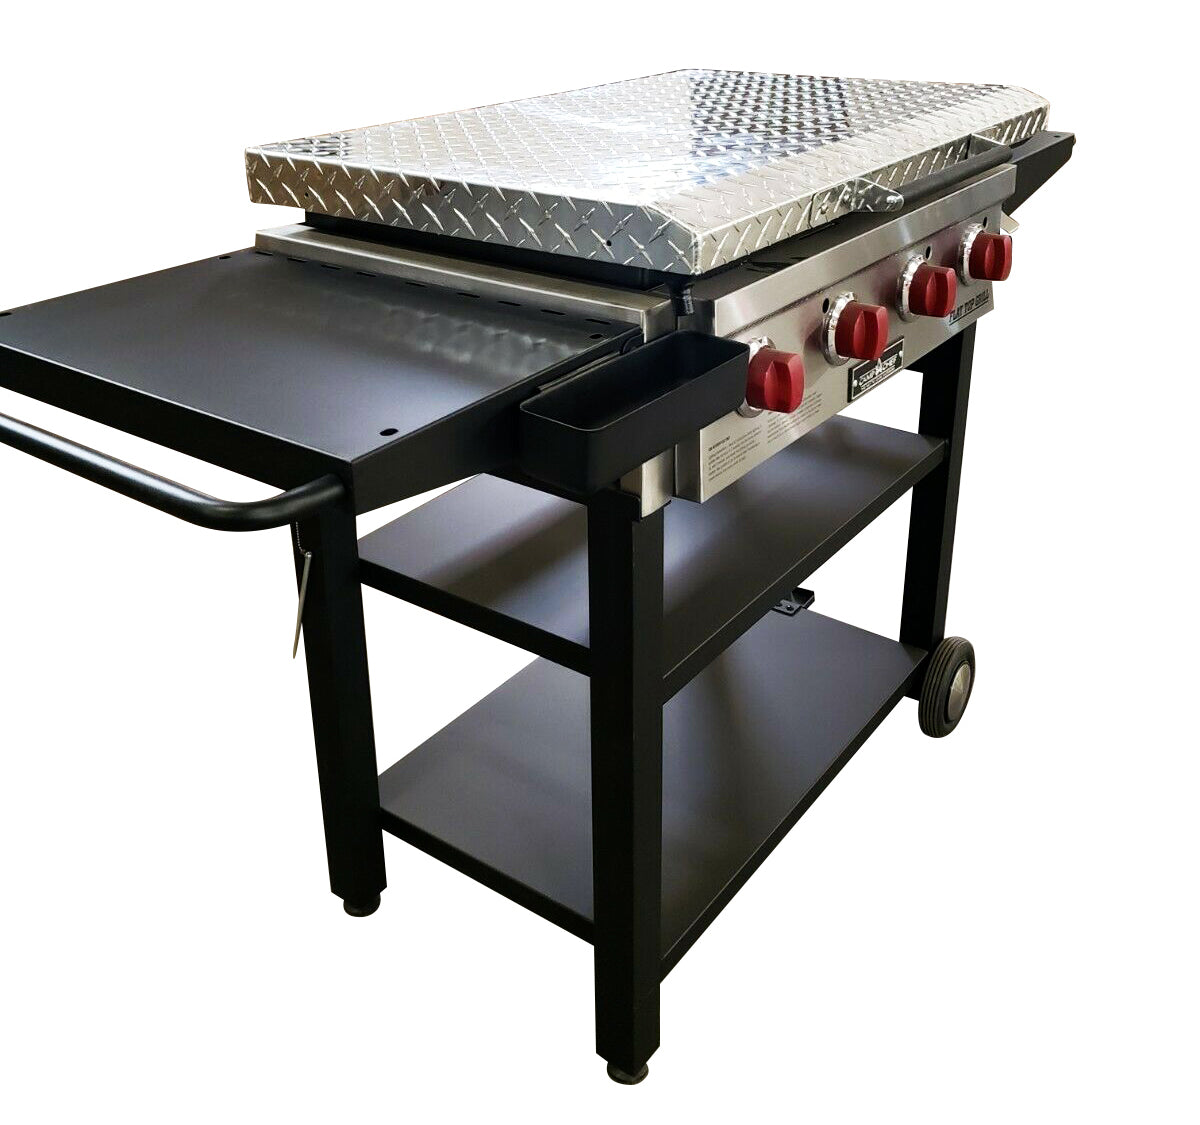 Camp Chef FTG 600 Griddle Cover-griddle Not Included 